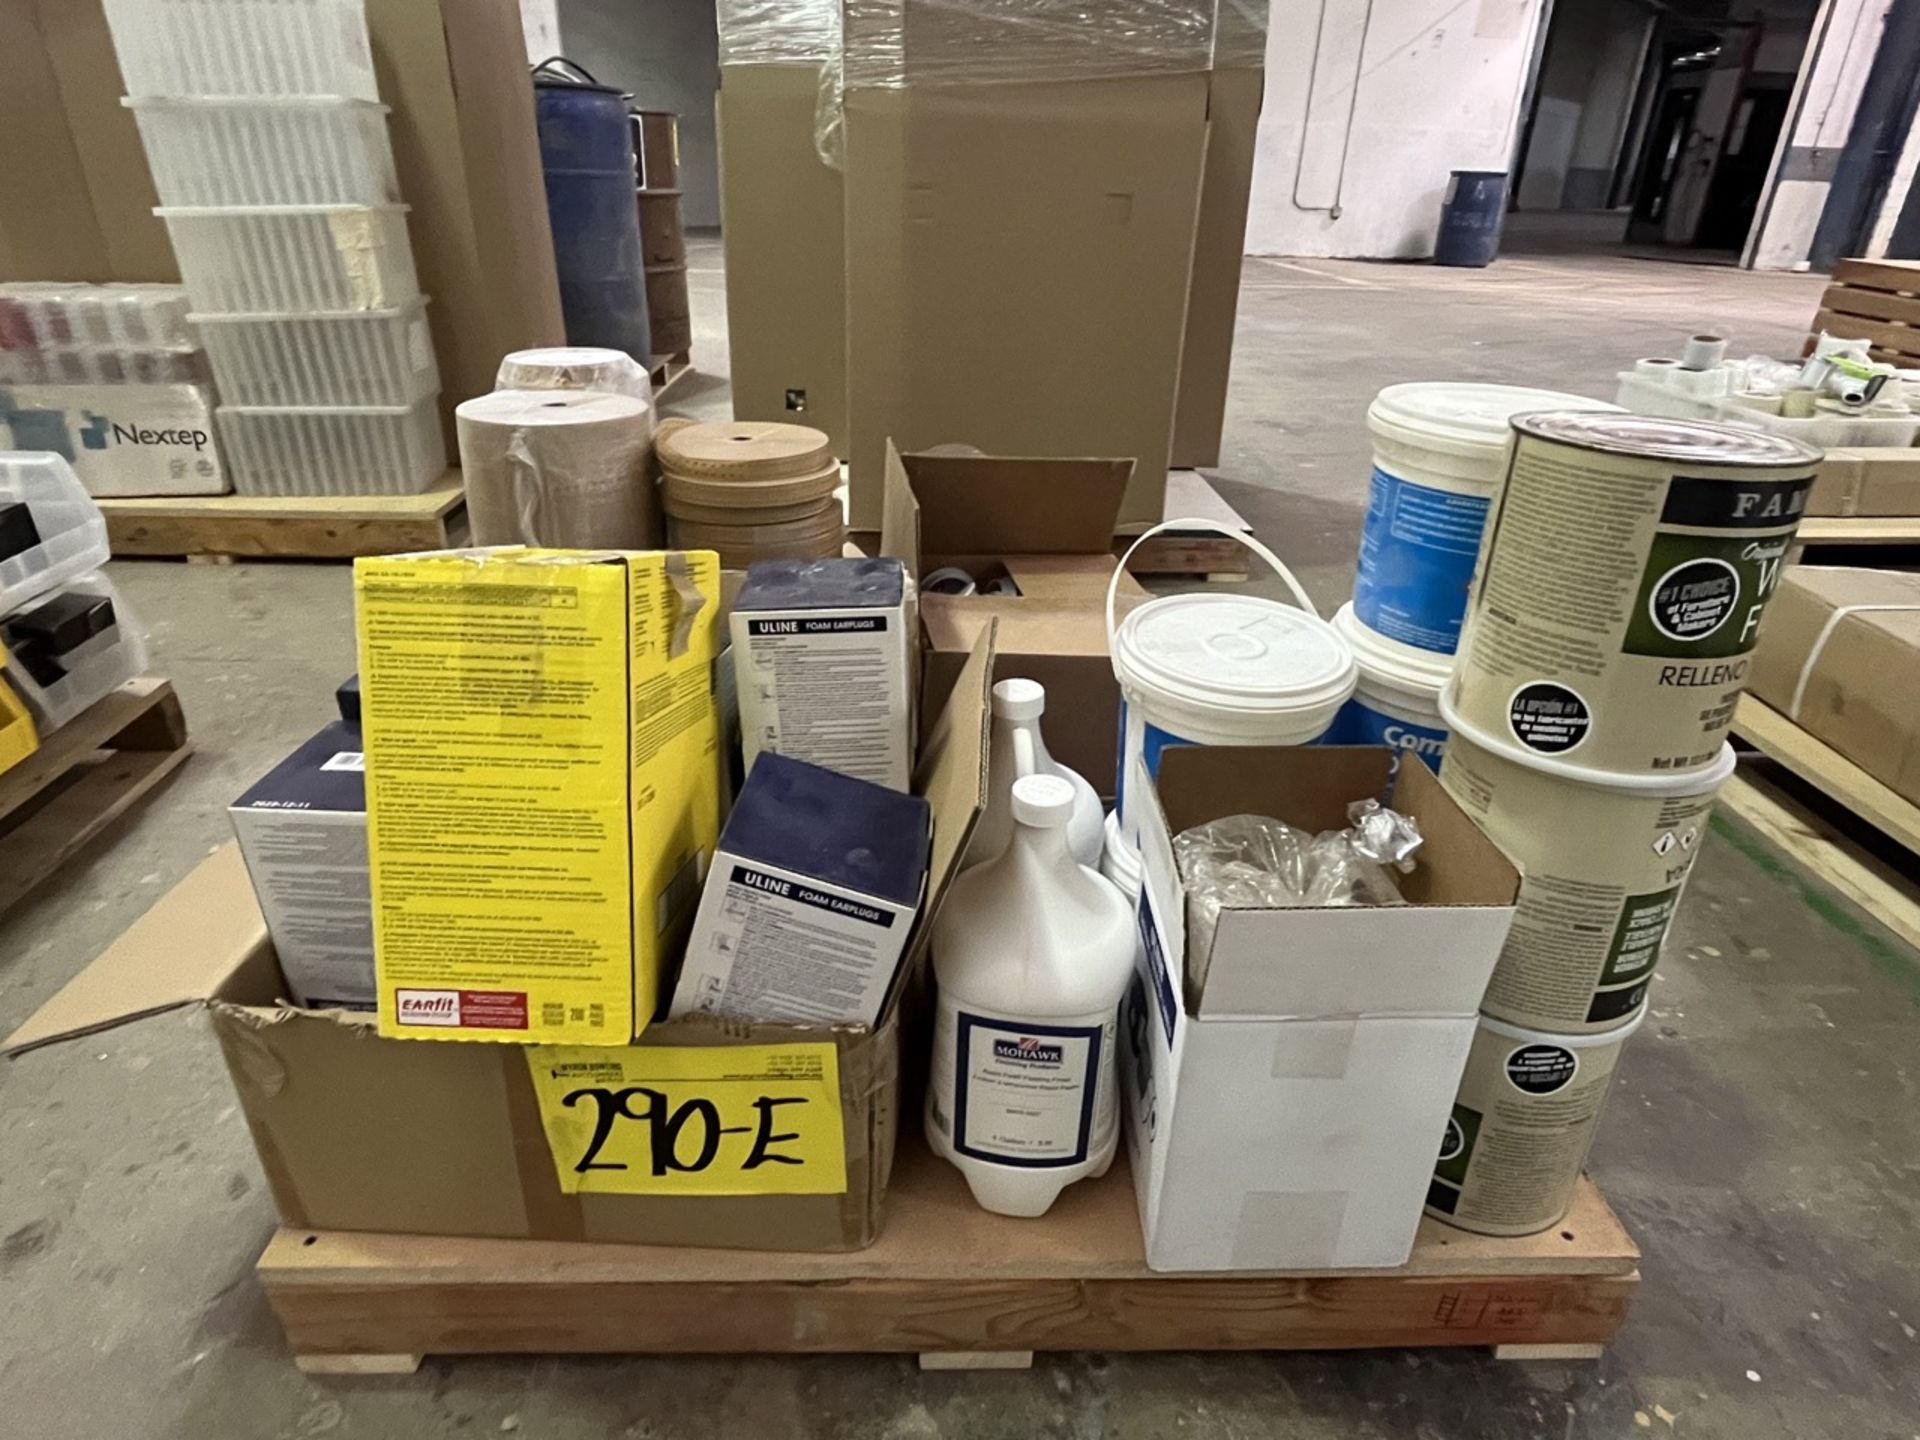 (NEW) Pallet with diverse feedstock contains: 5 gallons of drywall filler, 3 gallons of wood fille